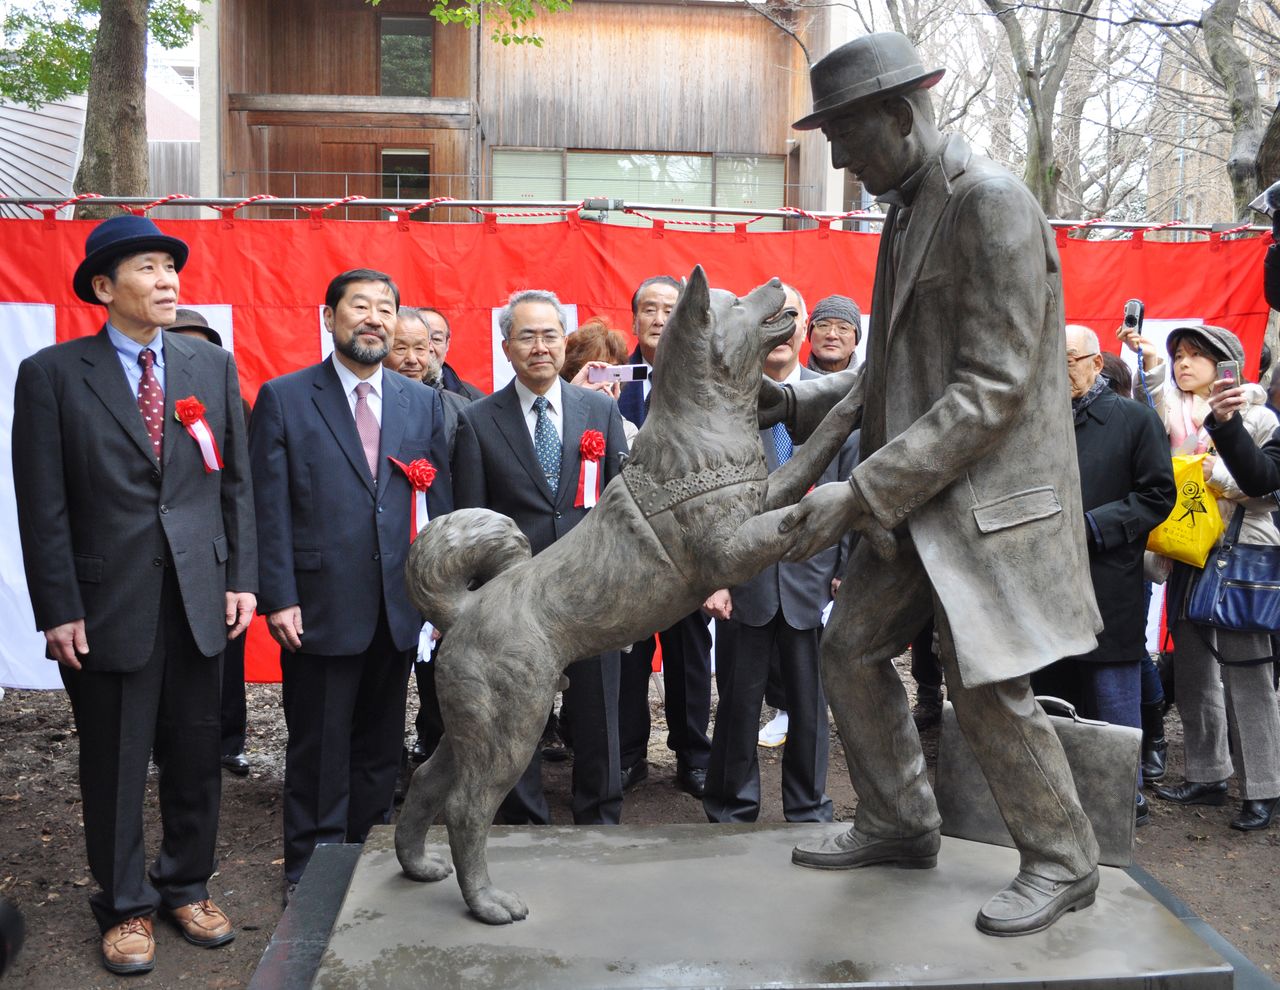 A statue depicting Hachikō greeting Professor Ueno, at the Faculty of Agriculture of the University of Tokyo, in Bunkyō. (© Jiji)